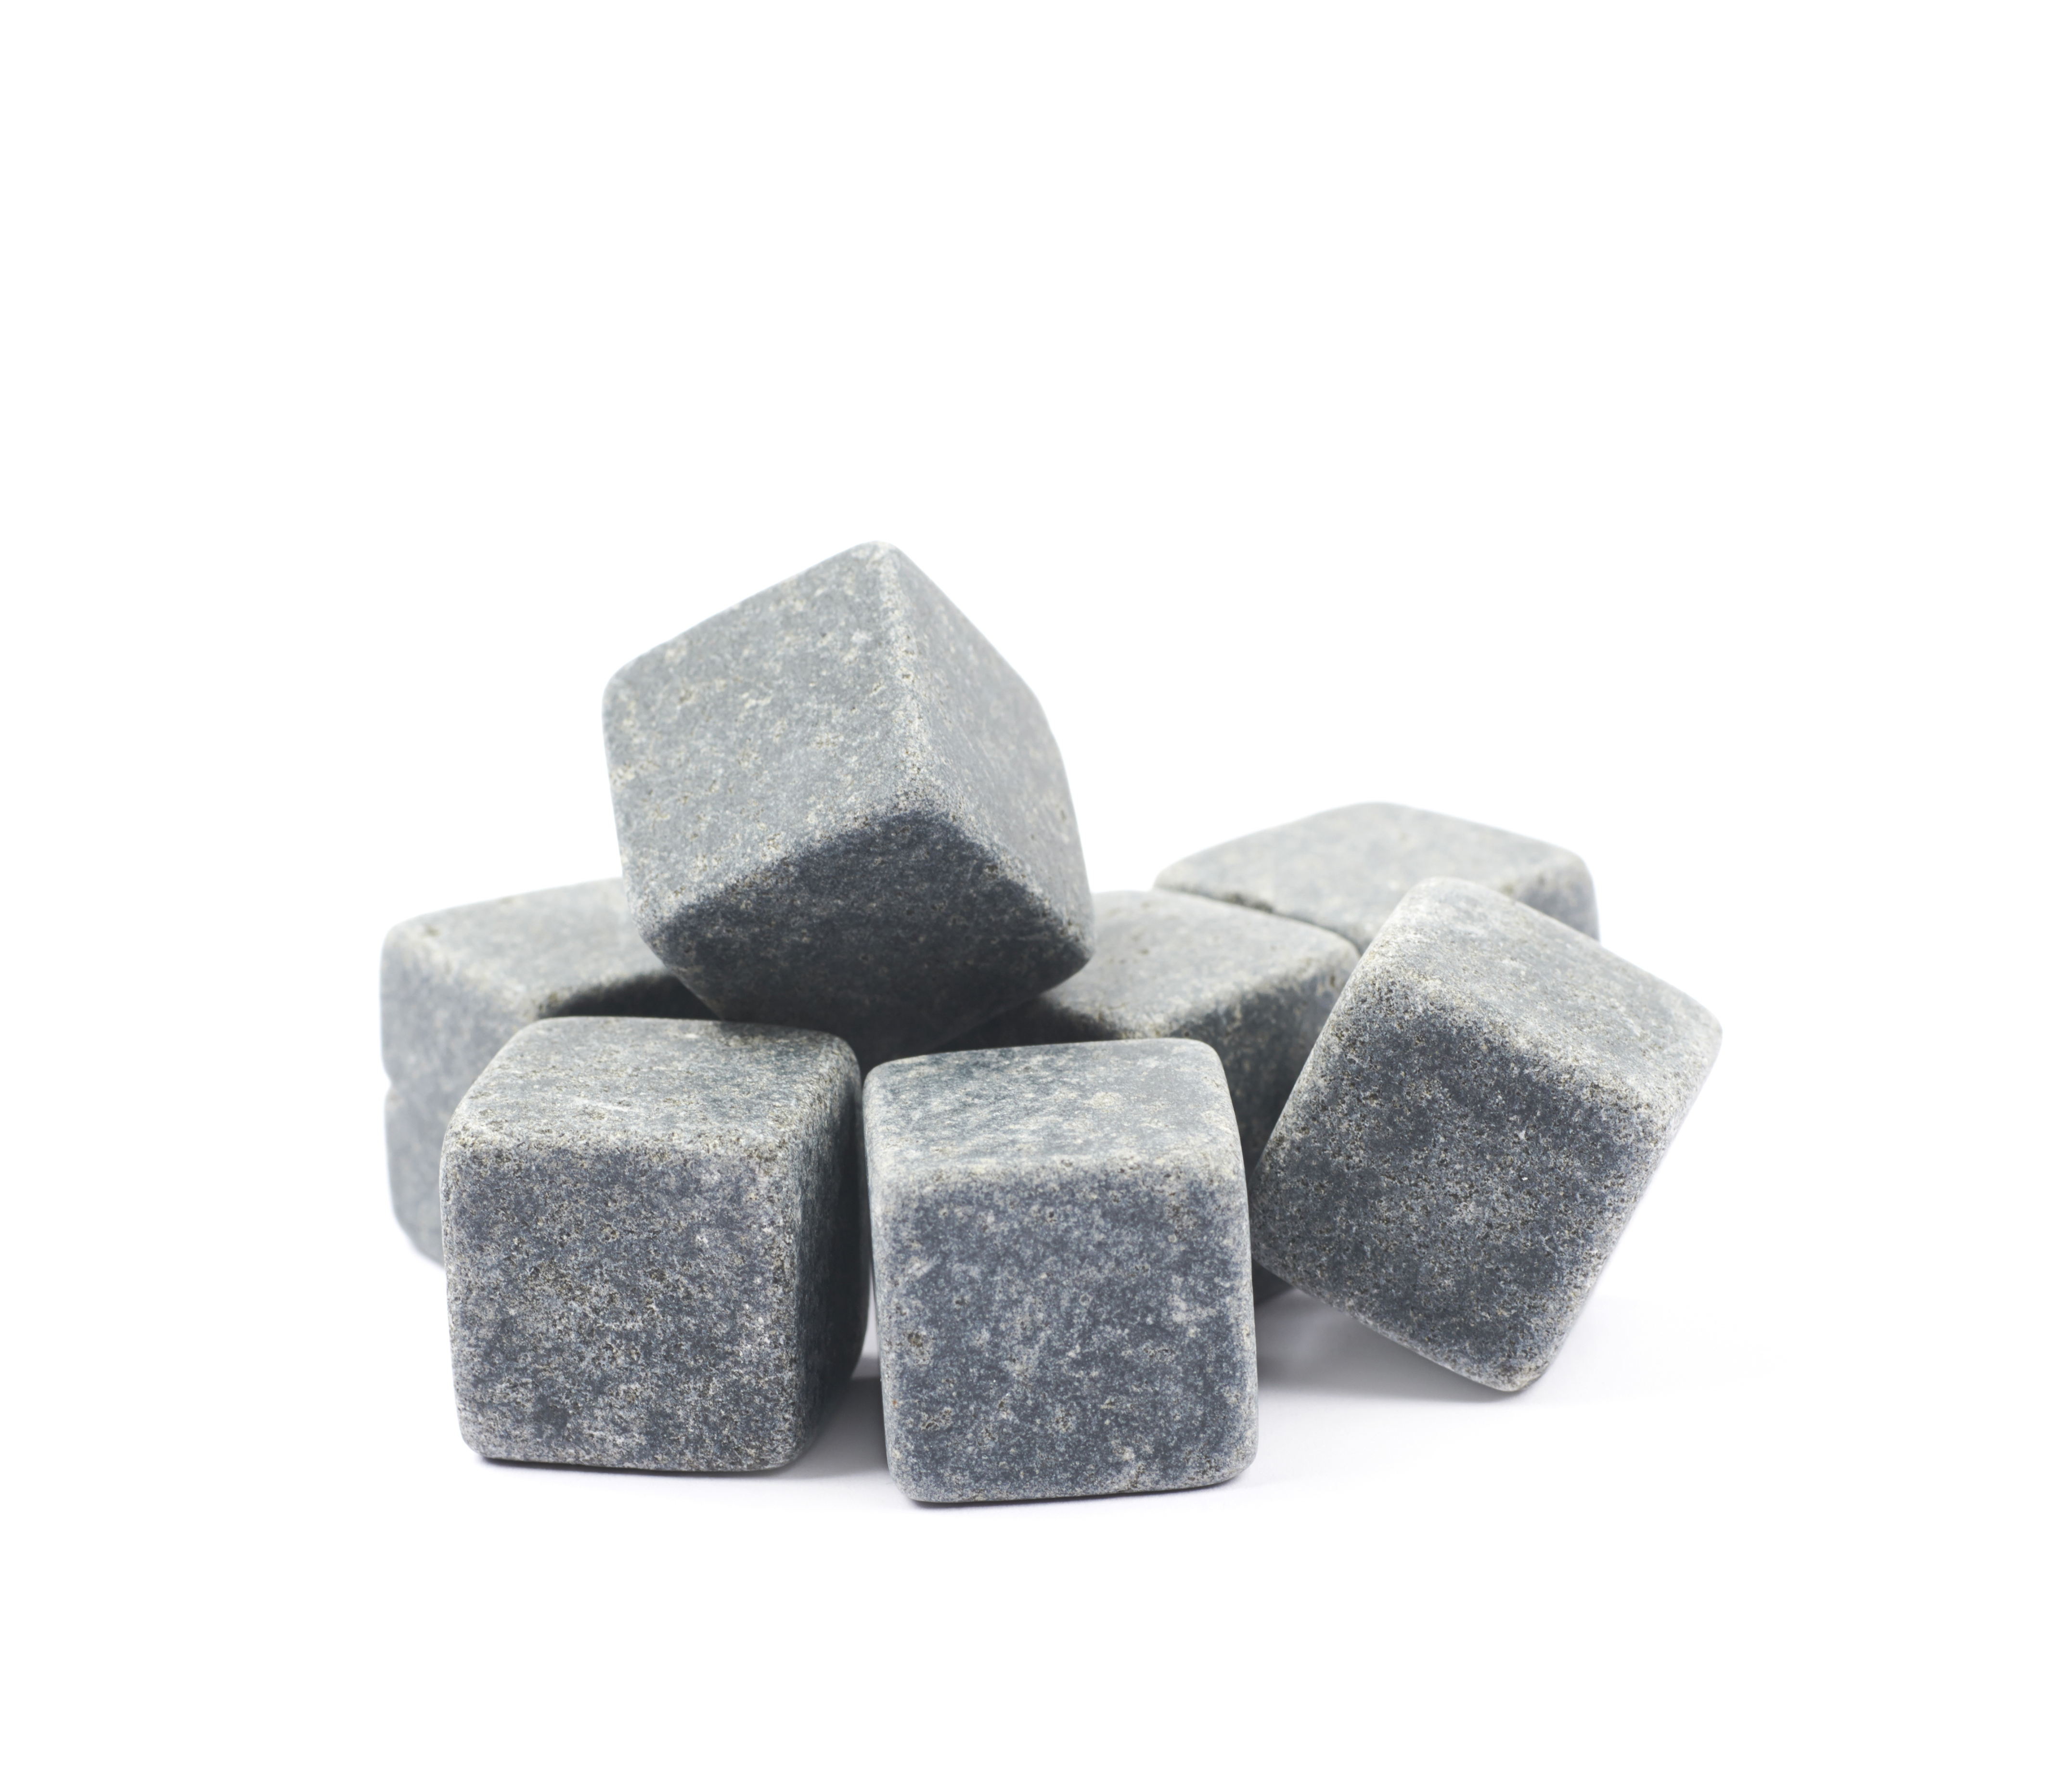 Air dry whiskey stones or pat them dry with a paper towel. | Source: Shutterstock